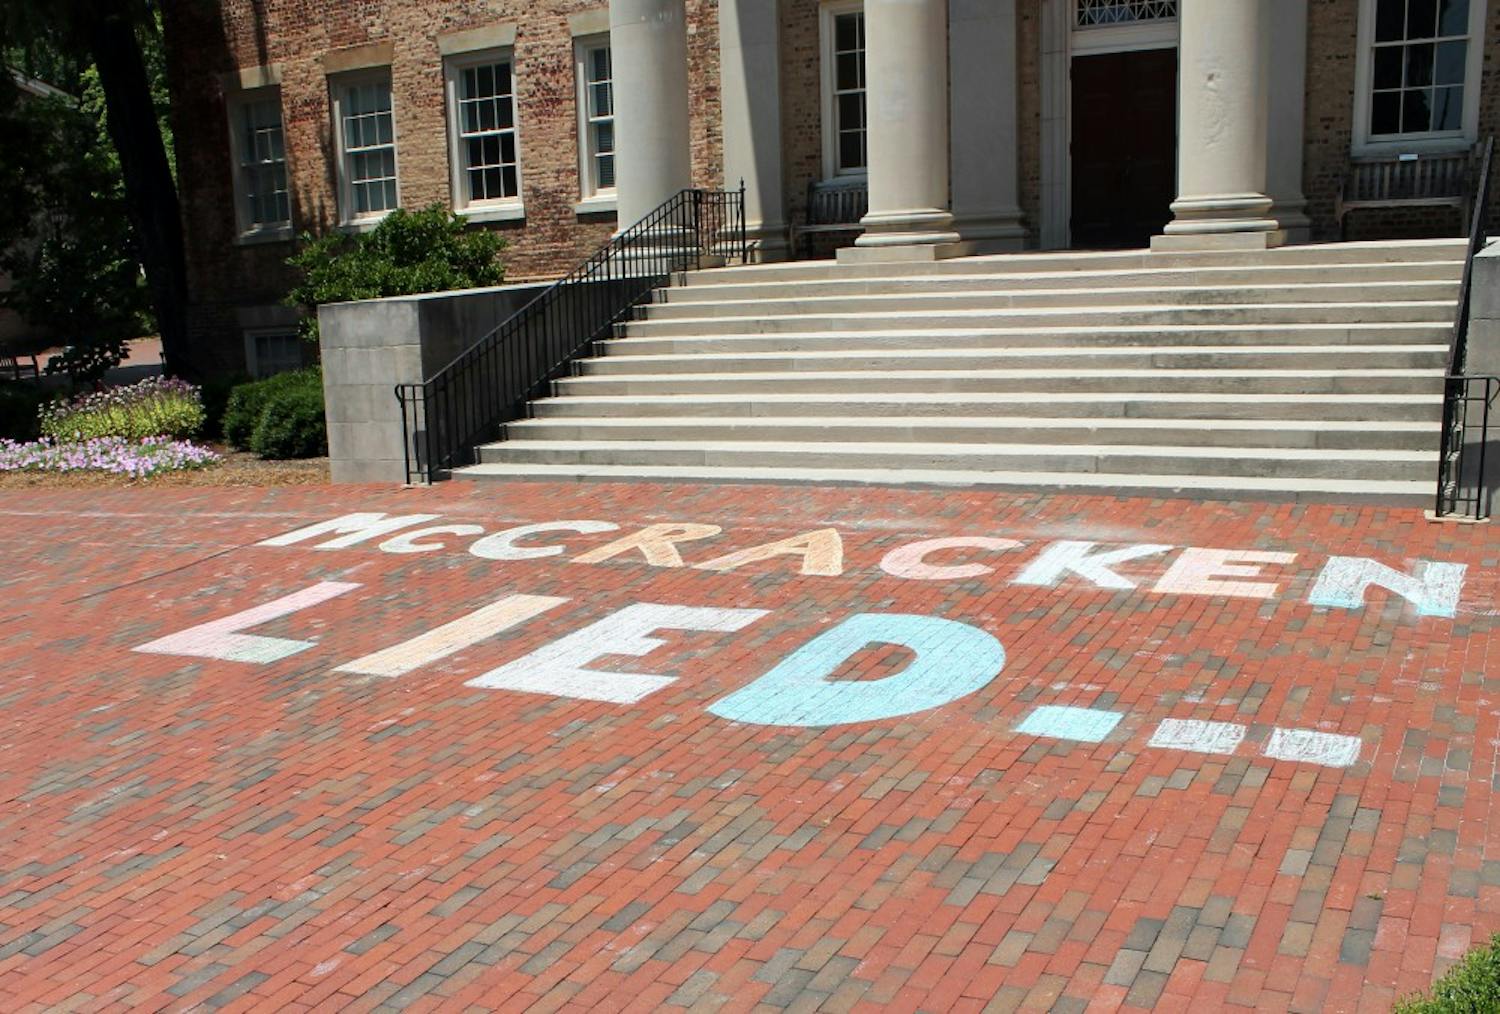 On July 11, protestors chalked "McCracken Lied" on the bricks in front of South Building. 